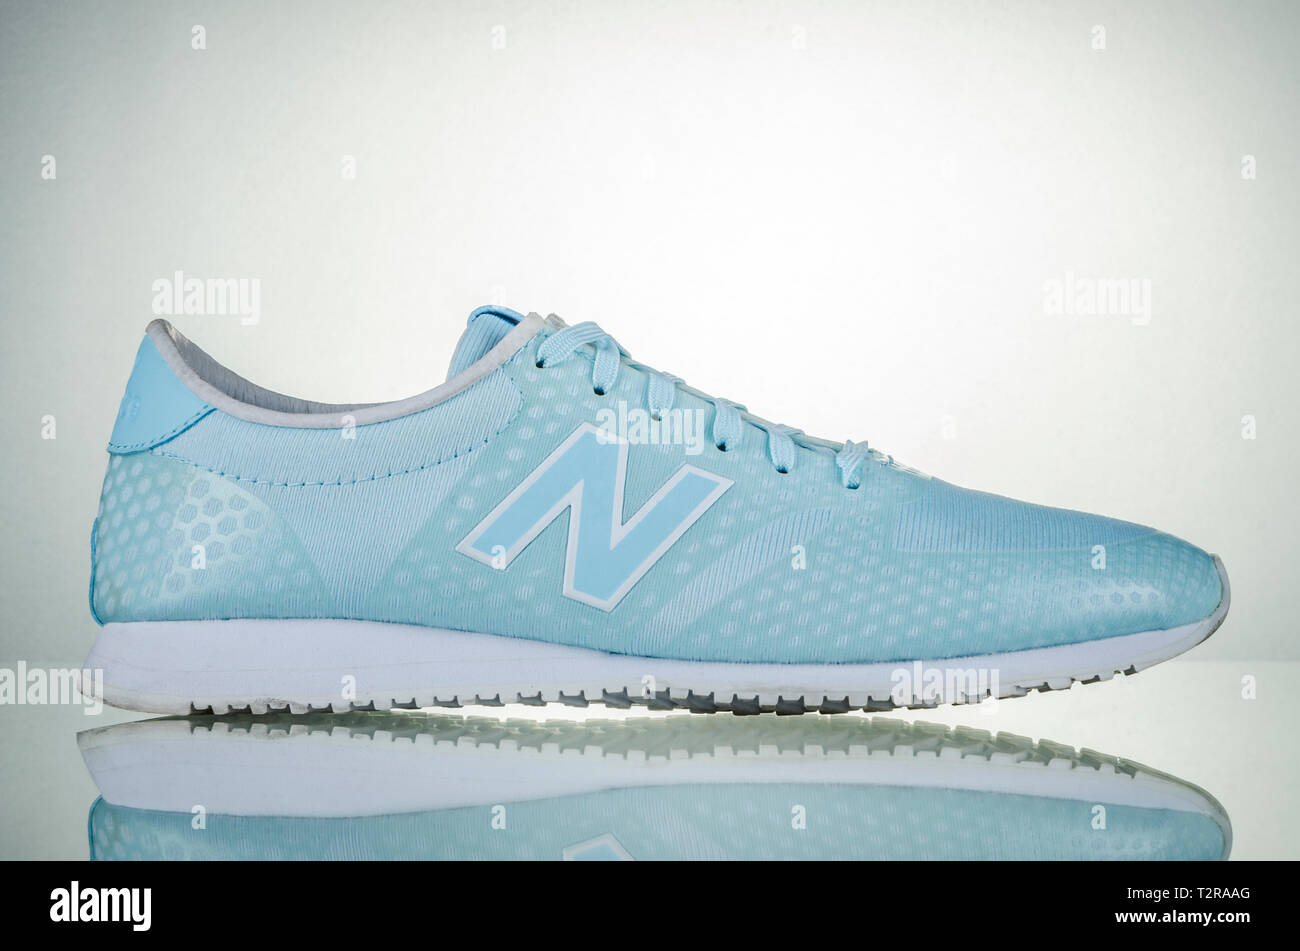 New Balance Logo High Resolution Stock Photography and Images - Alamy